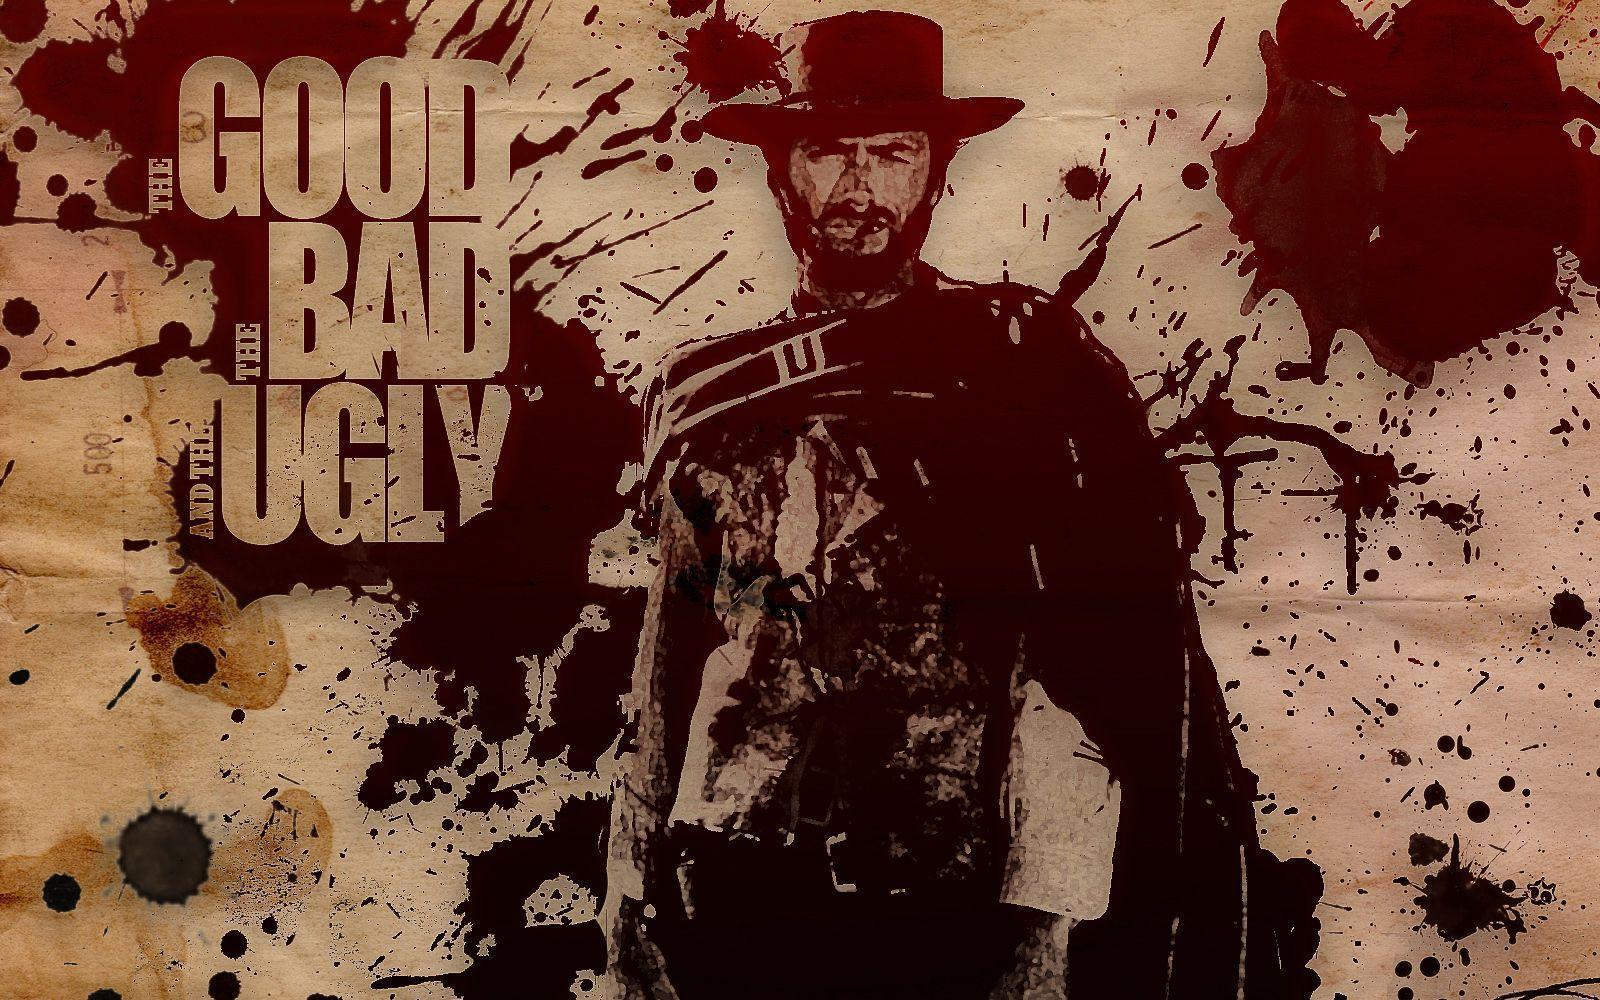 The Good, The Bad And The Ugly Wallpaper. The Good, The Bad